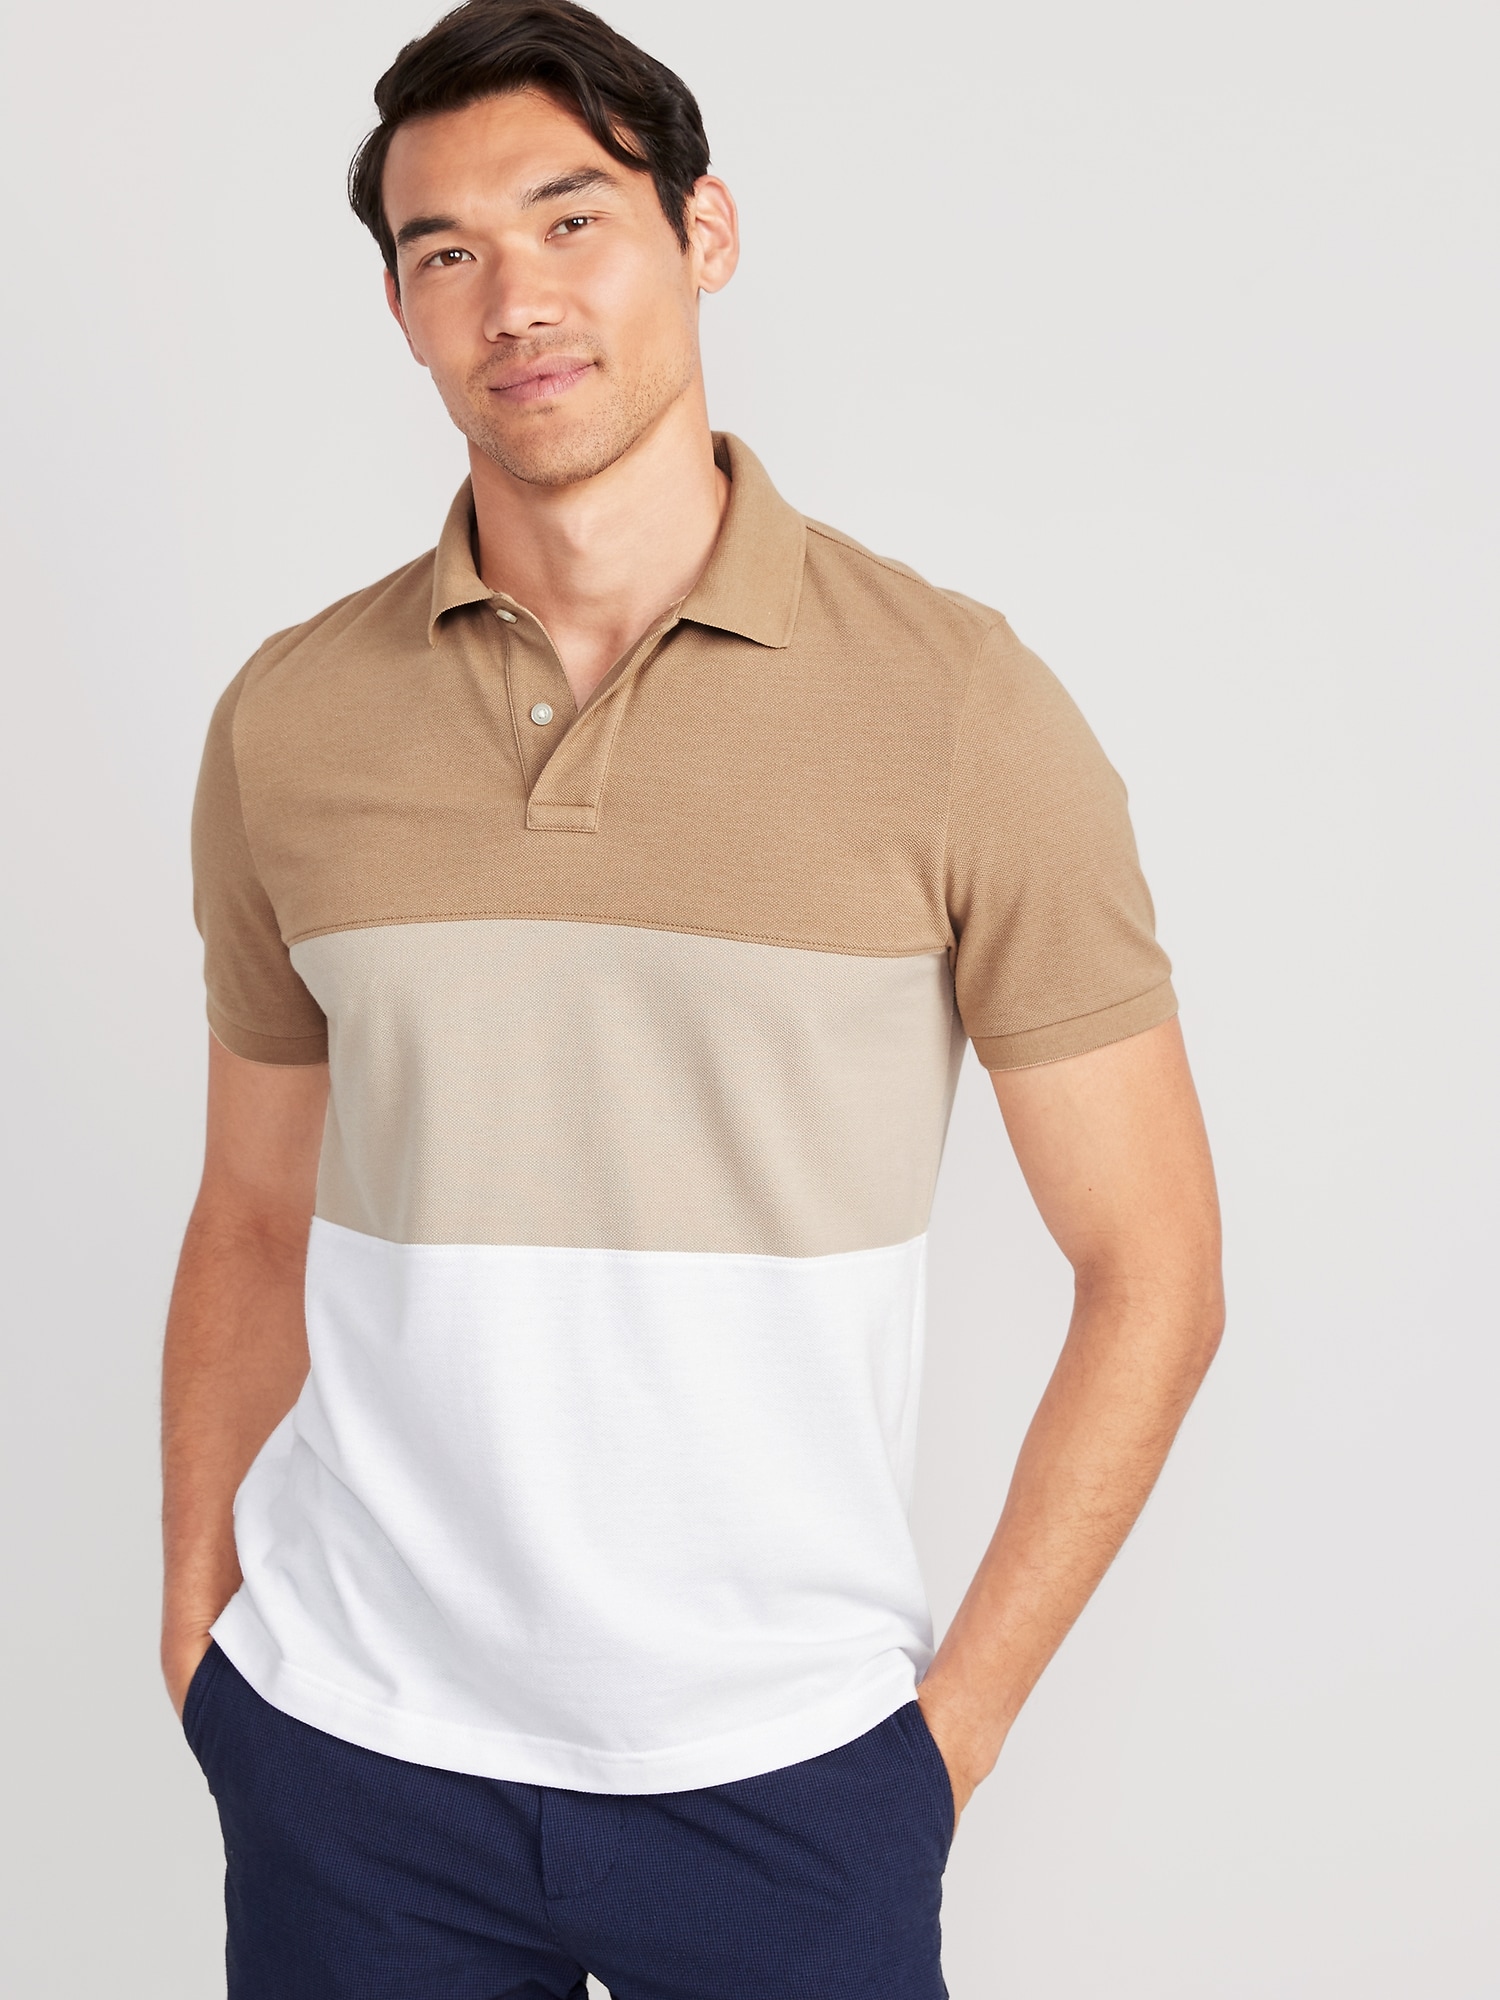 Old Navy Color-Block Classic Fit Pique Polo for Men brown. 1